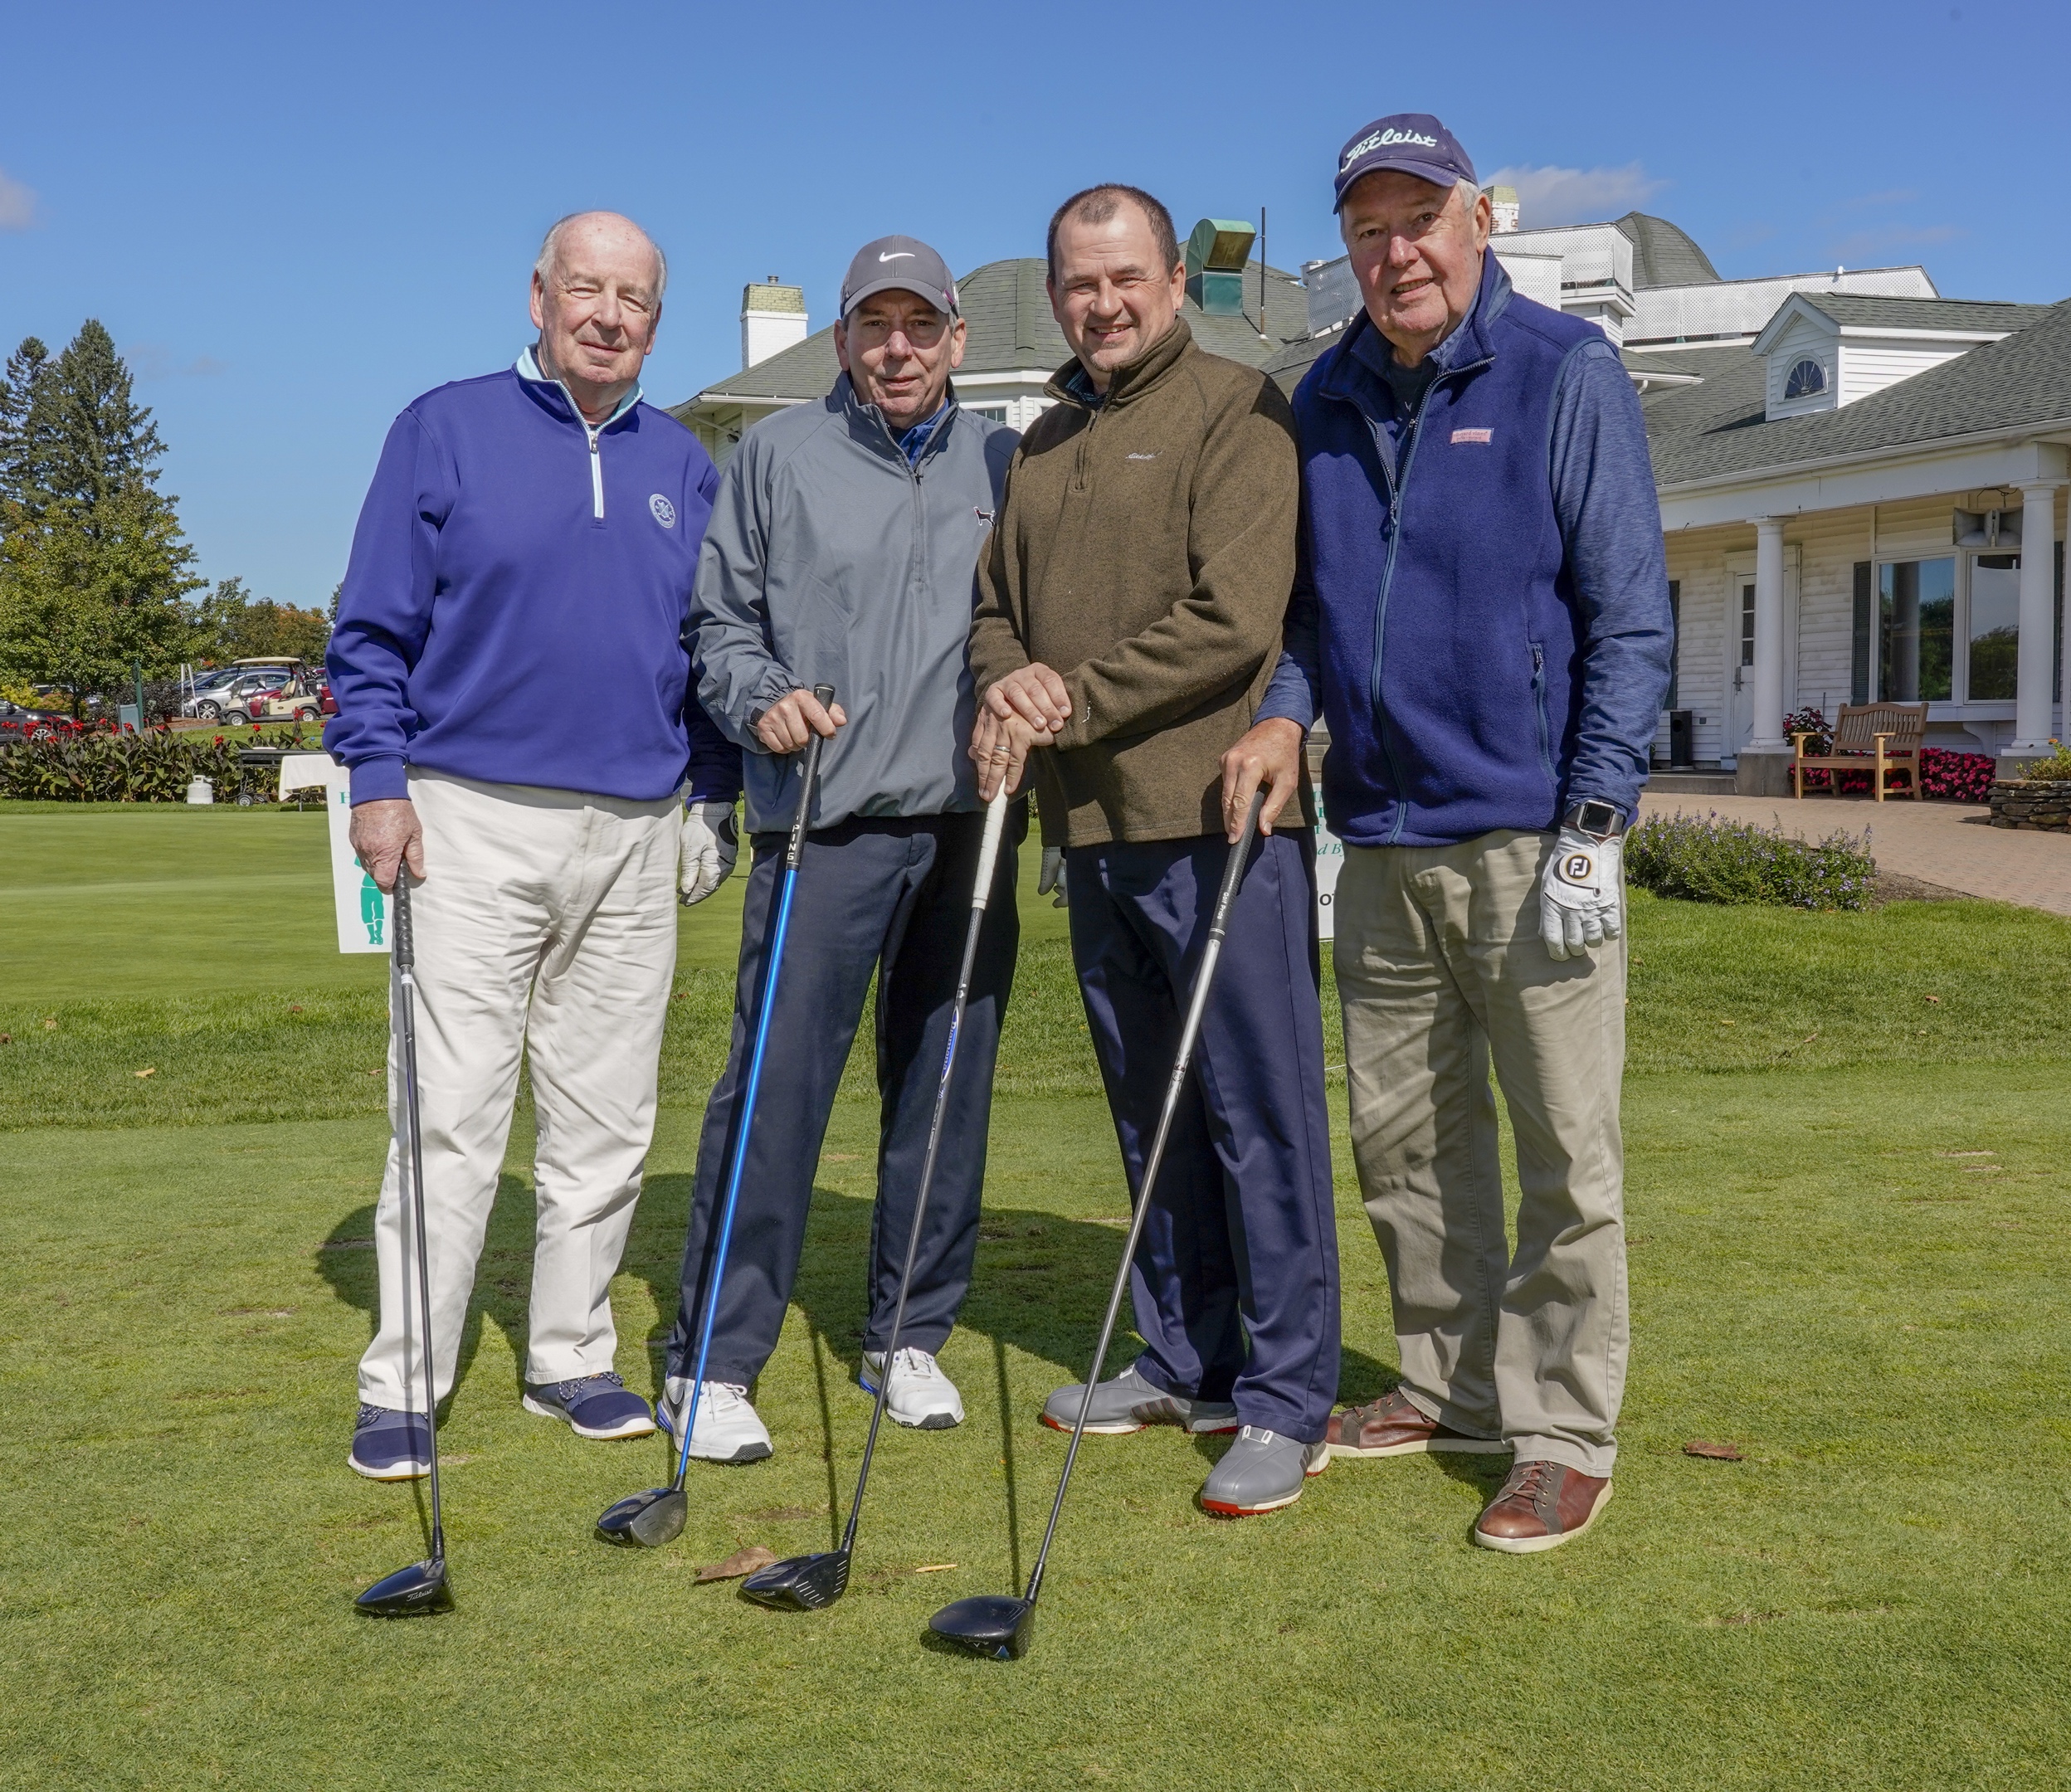 Four men stand with golf clubs